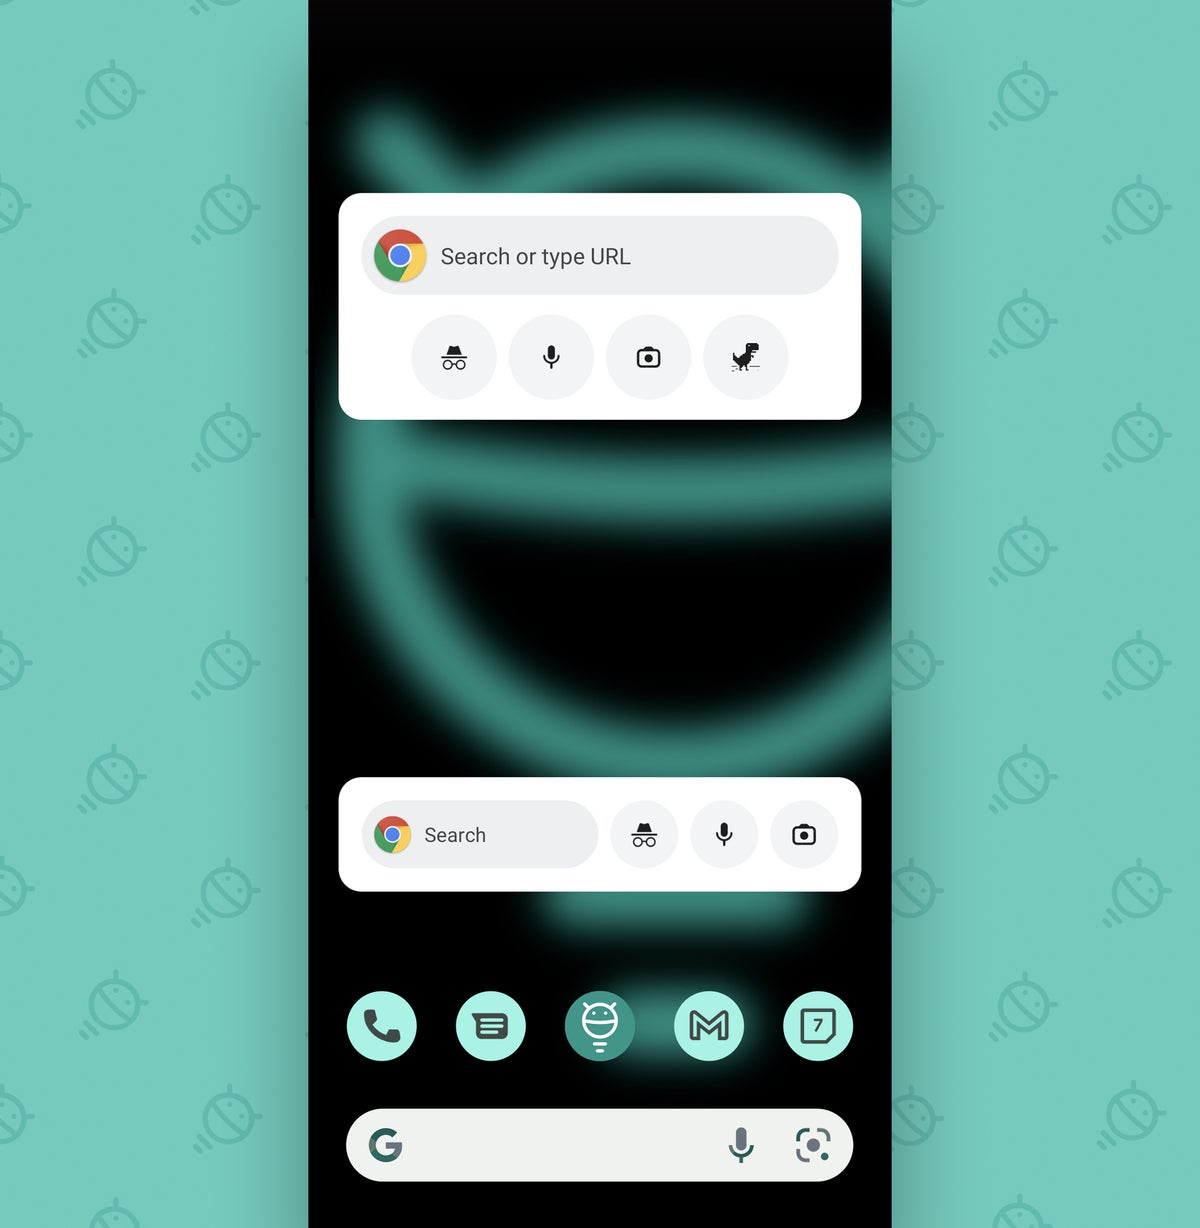 Chrome Android Settings: Widgets